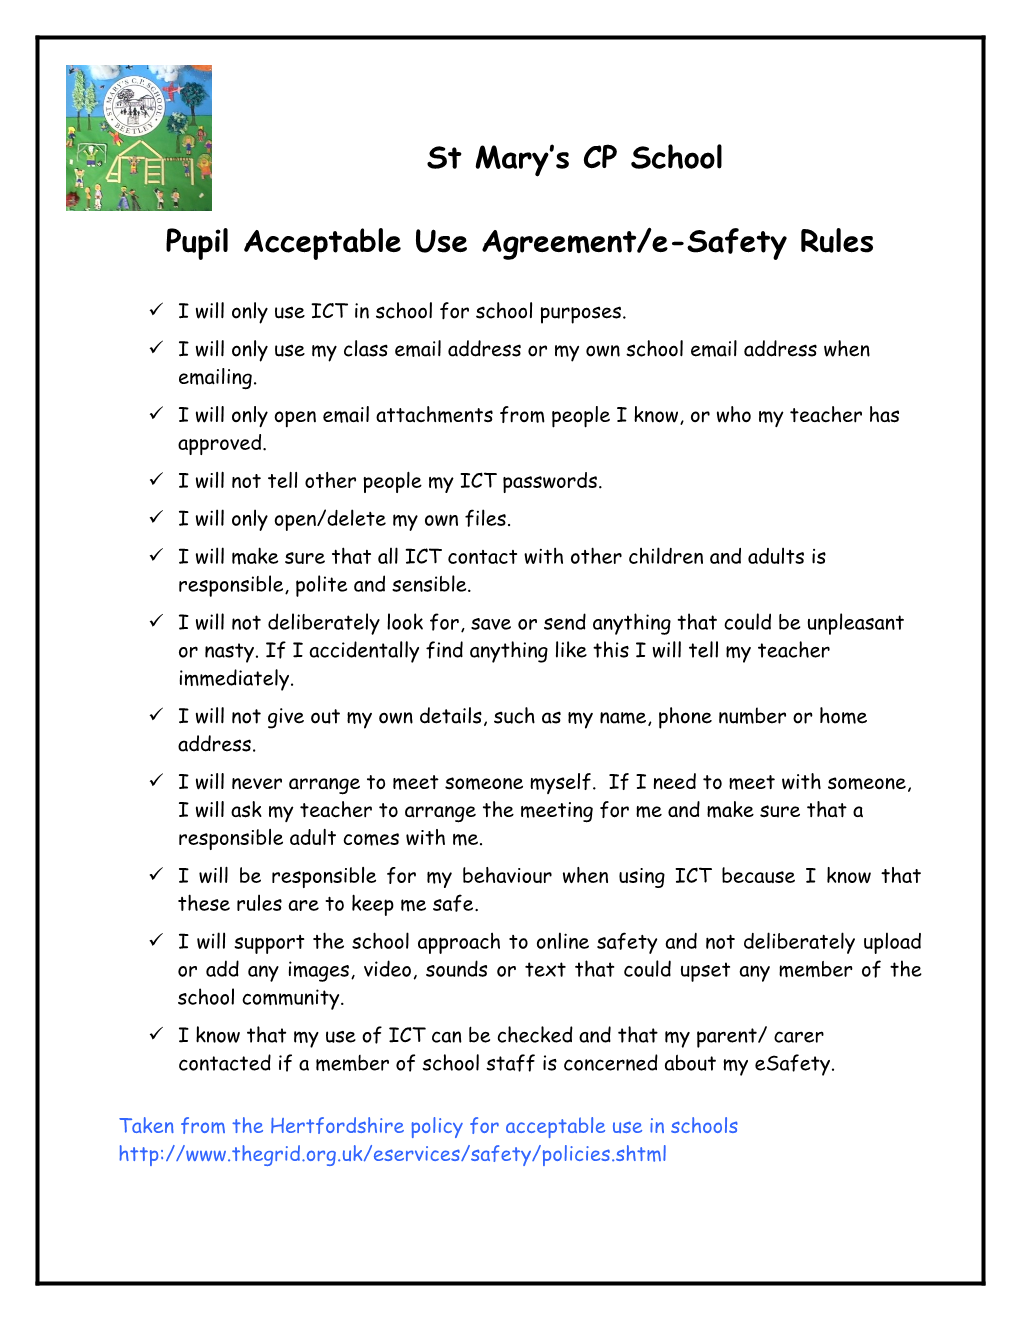 Hertfordshire Pupil Acceptable Use Policy